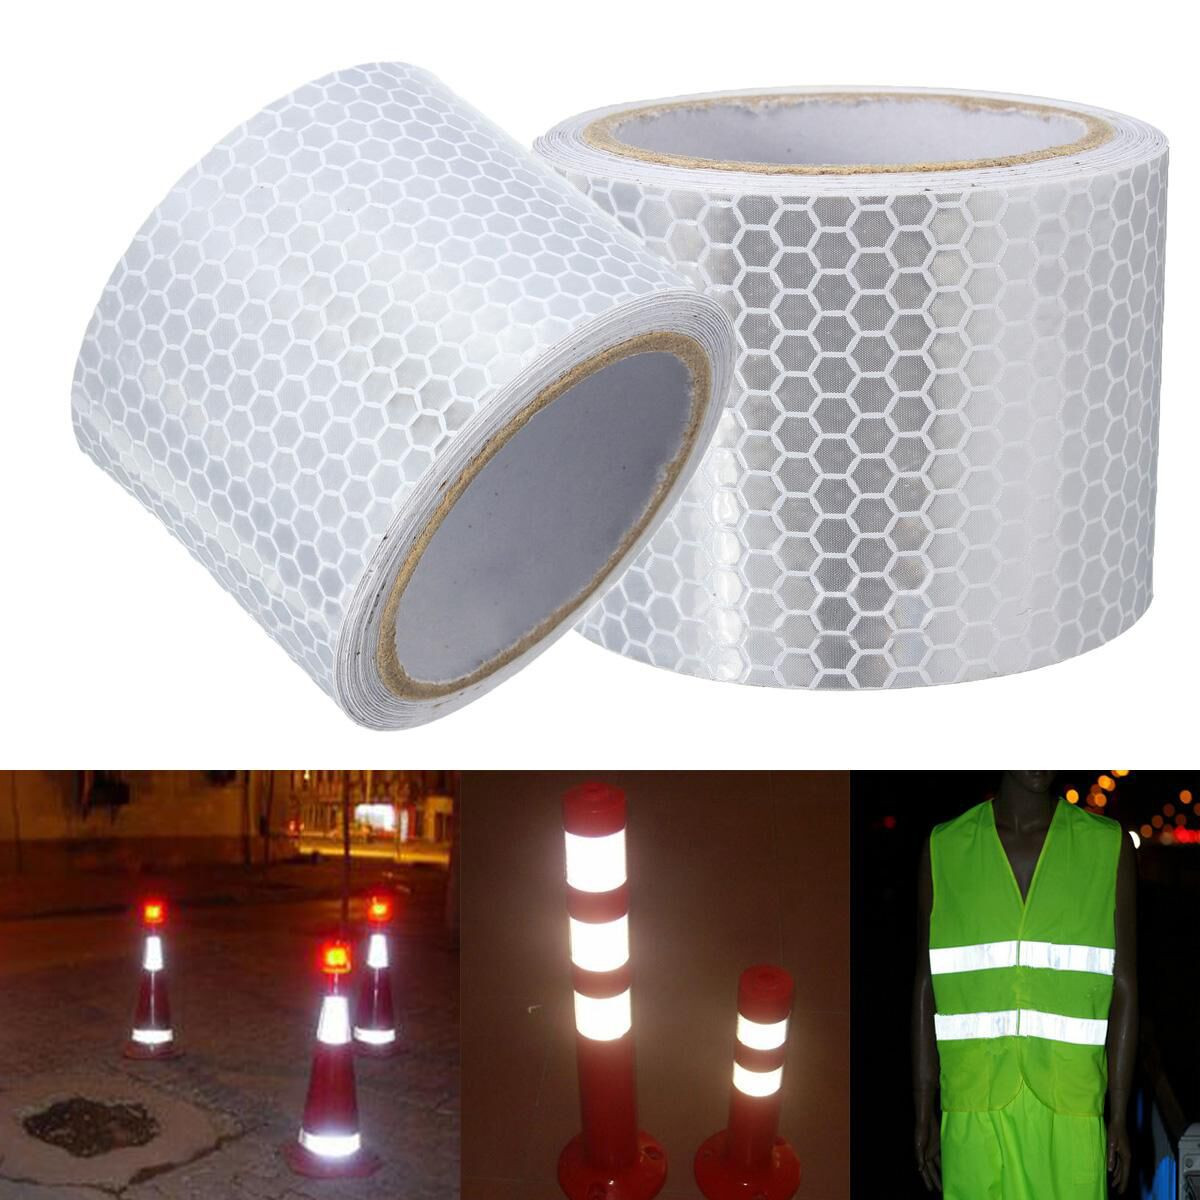 3m*5cm Car Truck Reflective Self-adhesive Safety Warning Tape Roll Film Sticker 